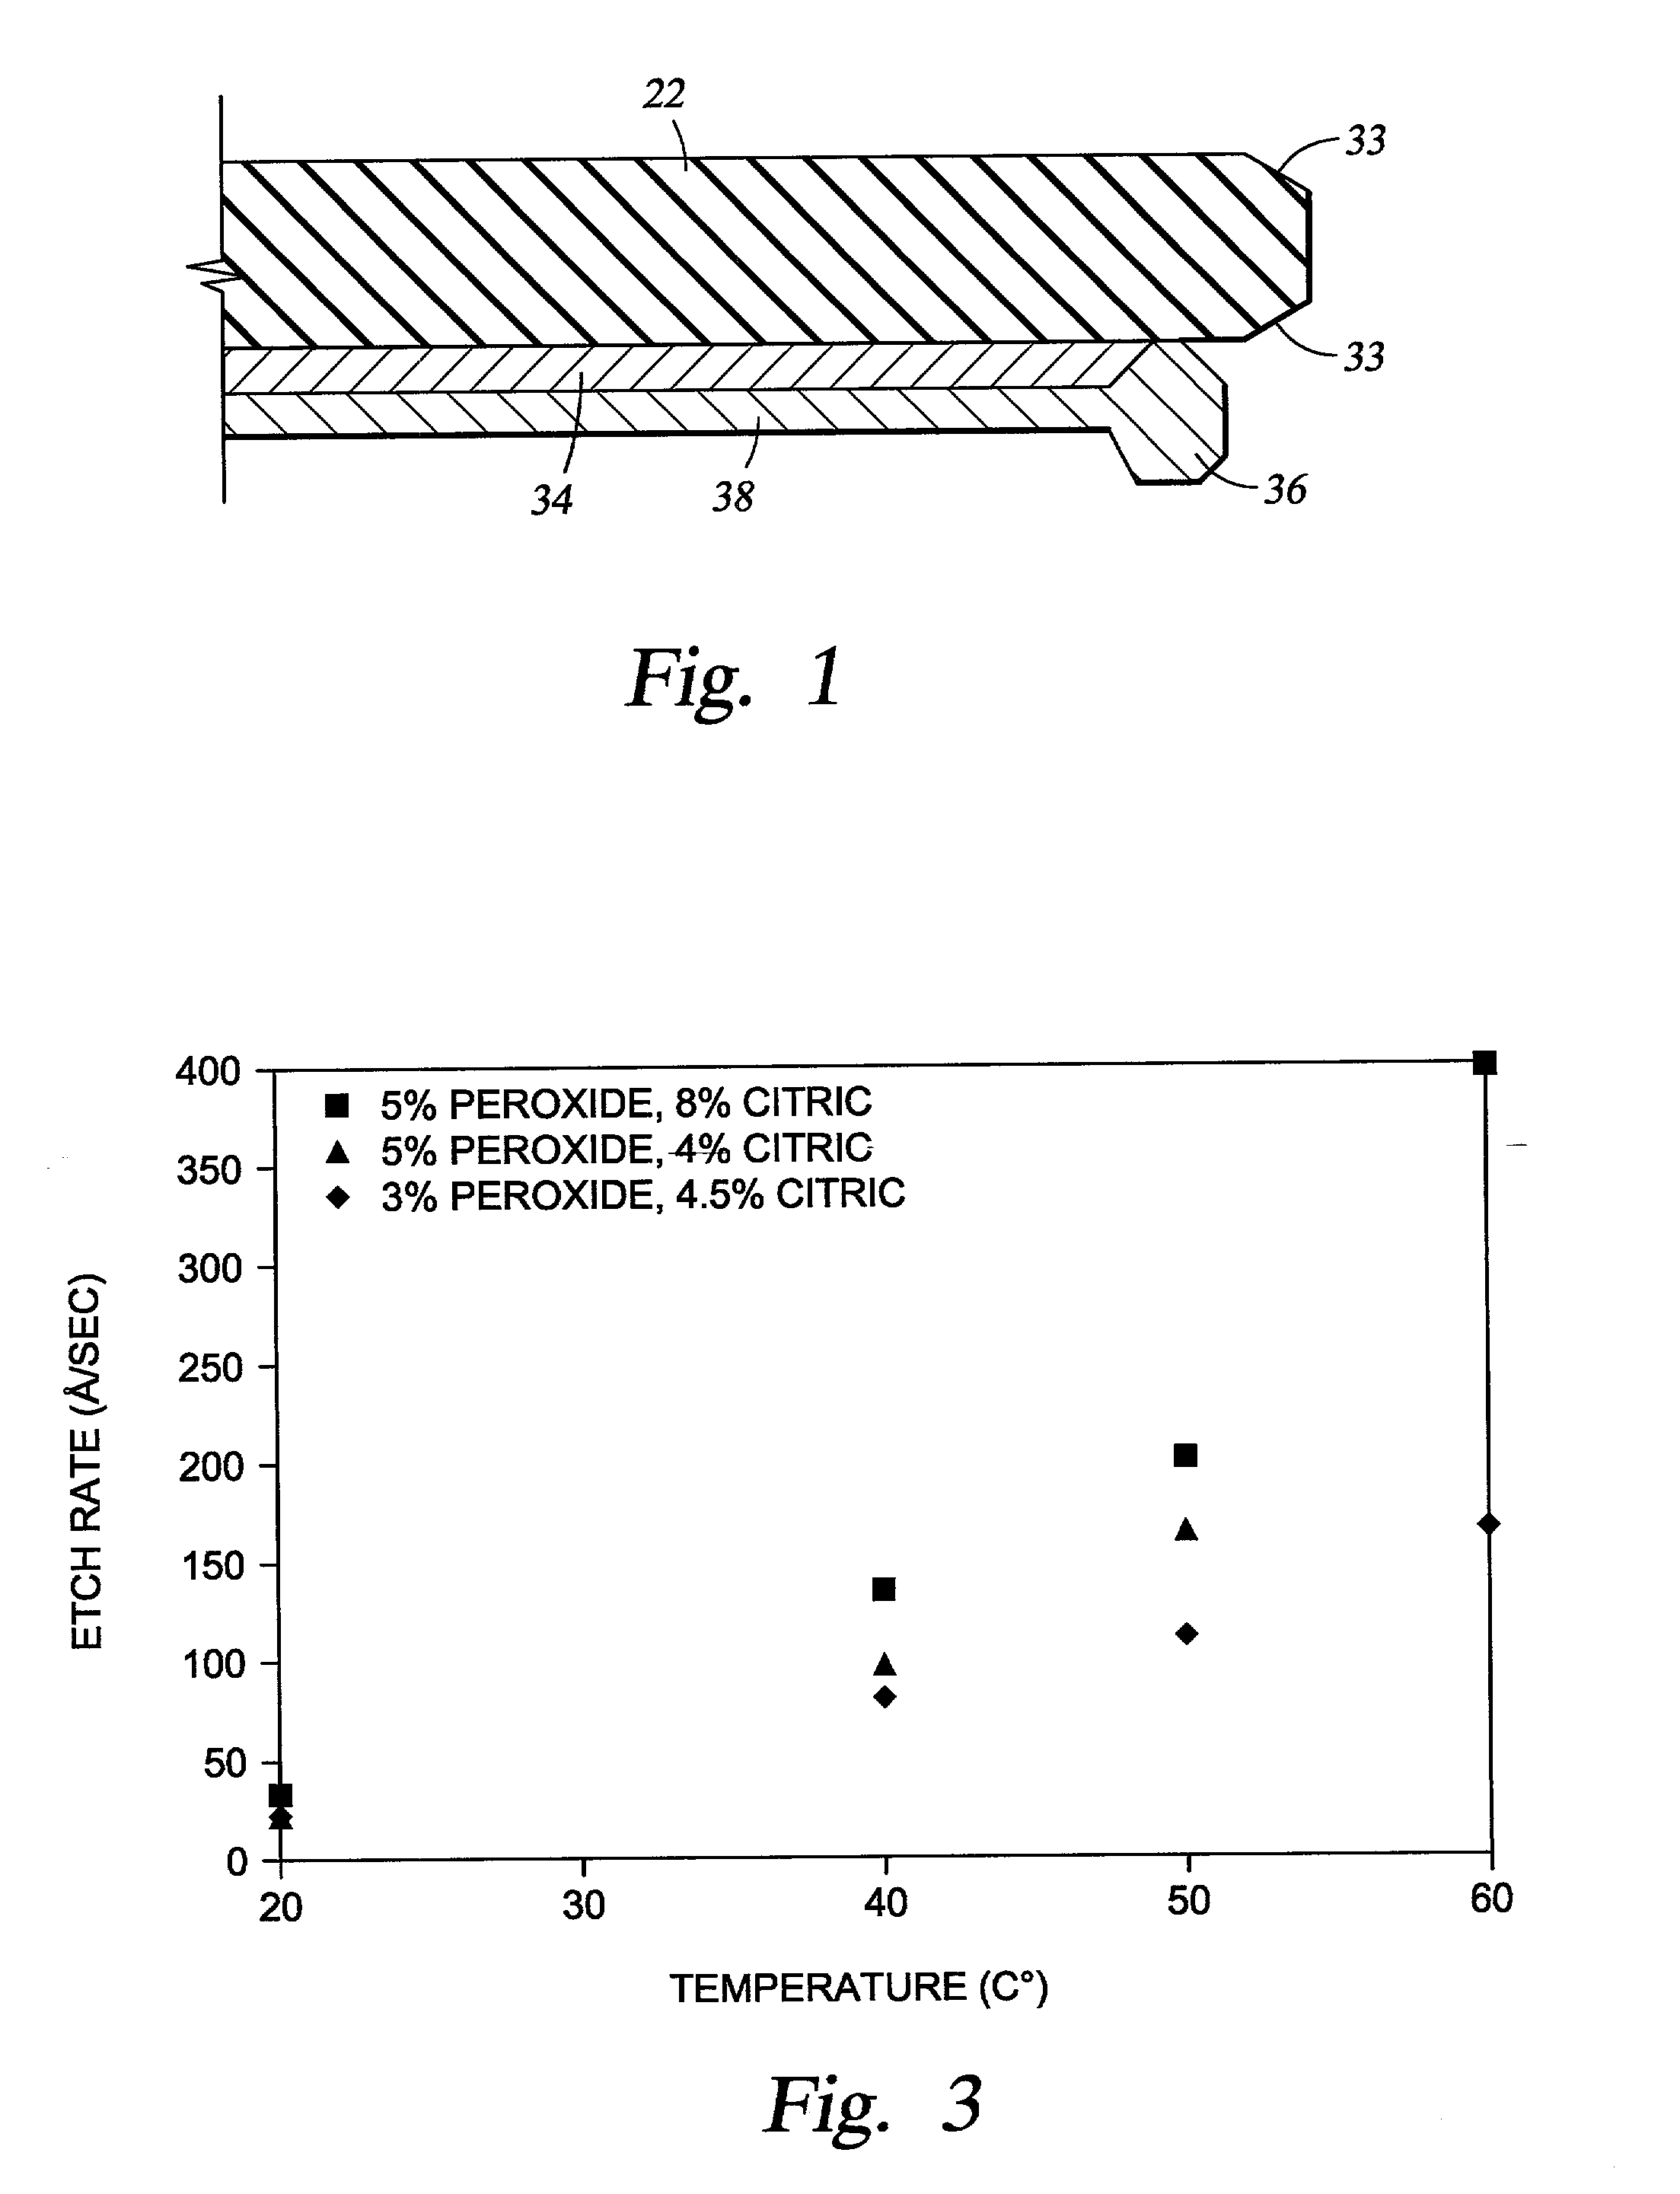 Chemical mixture for copper removal in electroplating systems